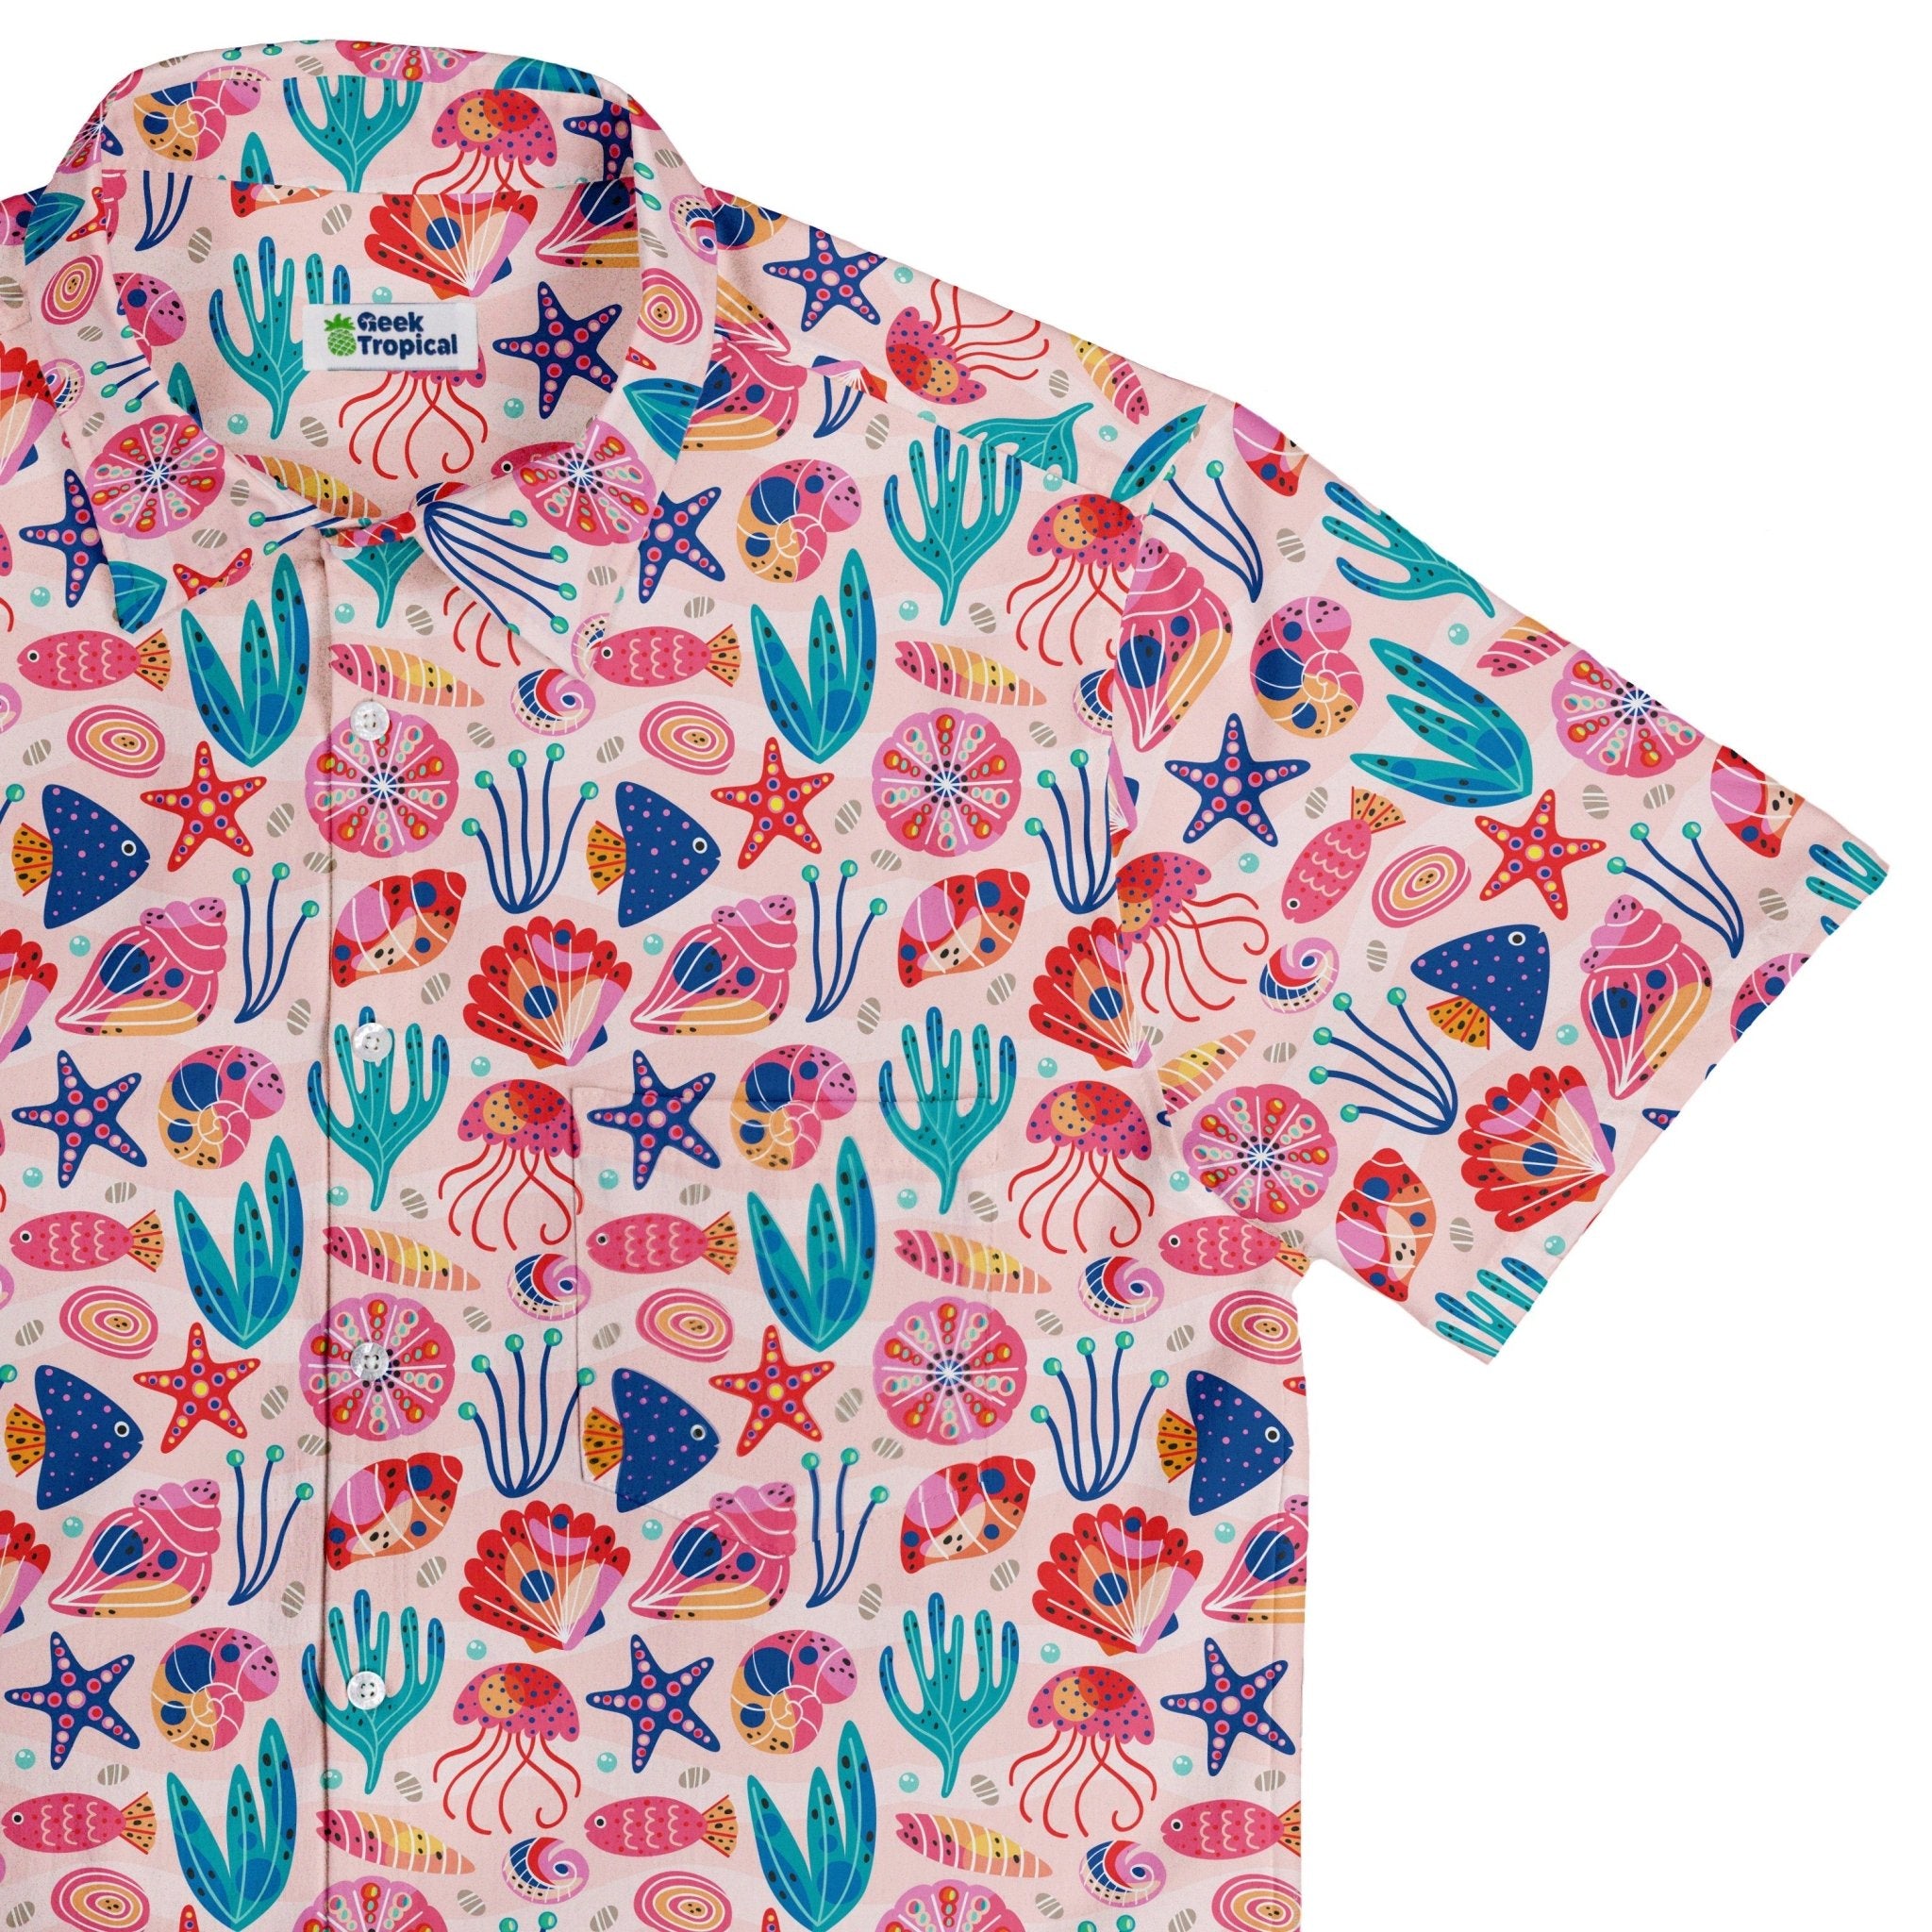 Science Cute Marine Biology Pink Button Up Shirt - adult sizing - Animal Patterns - science print